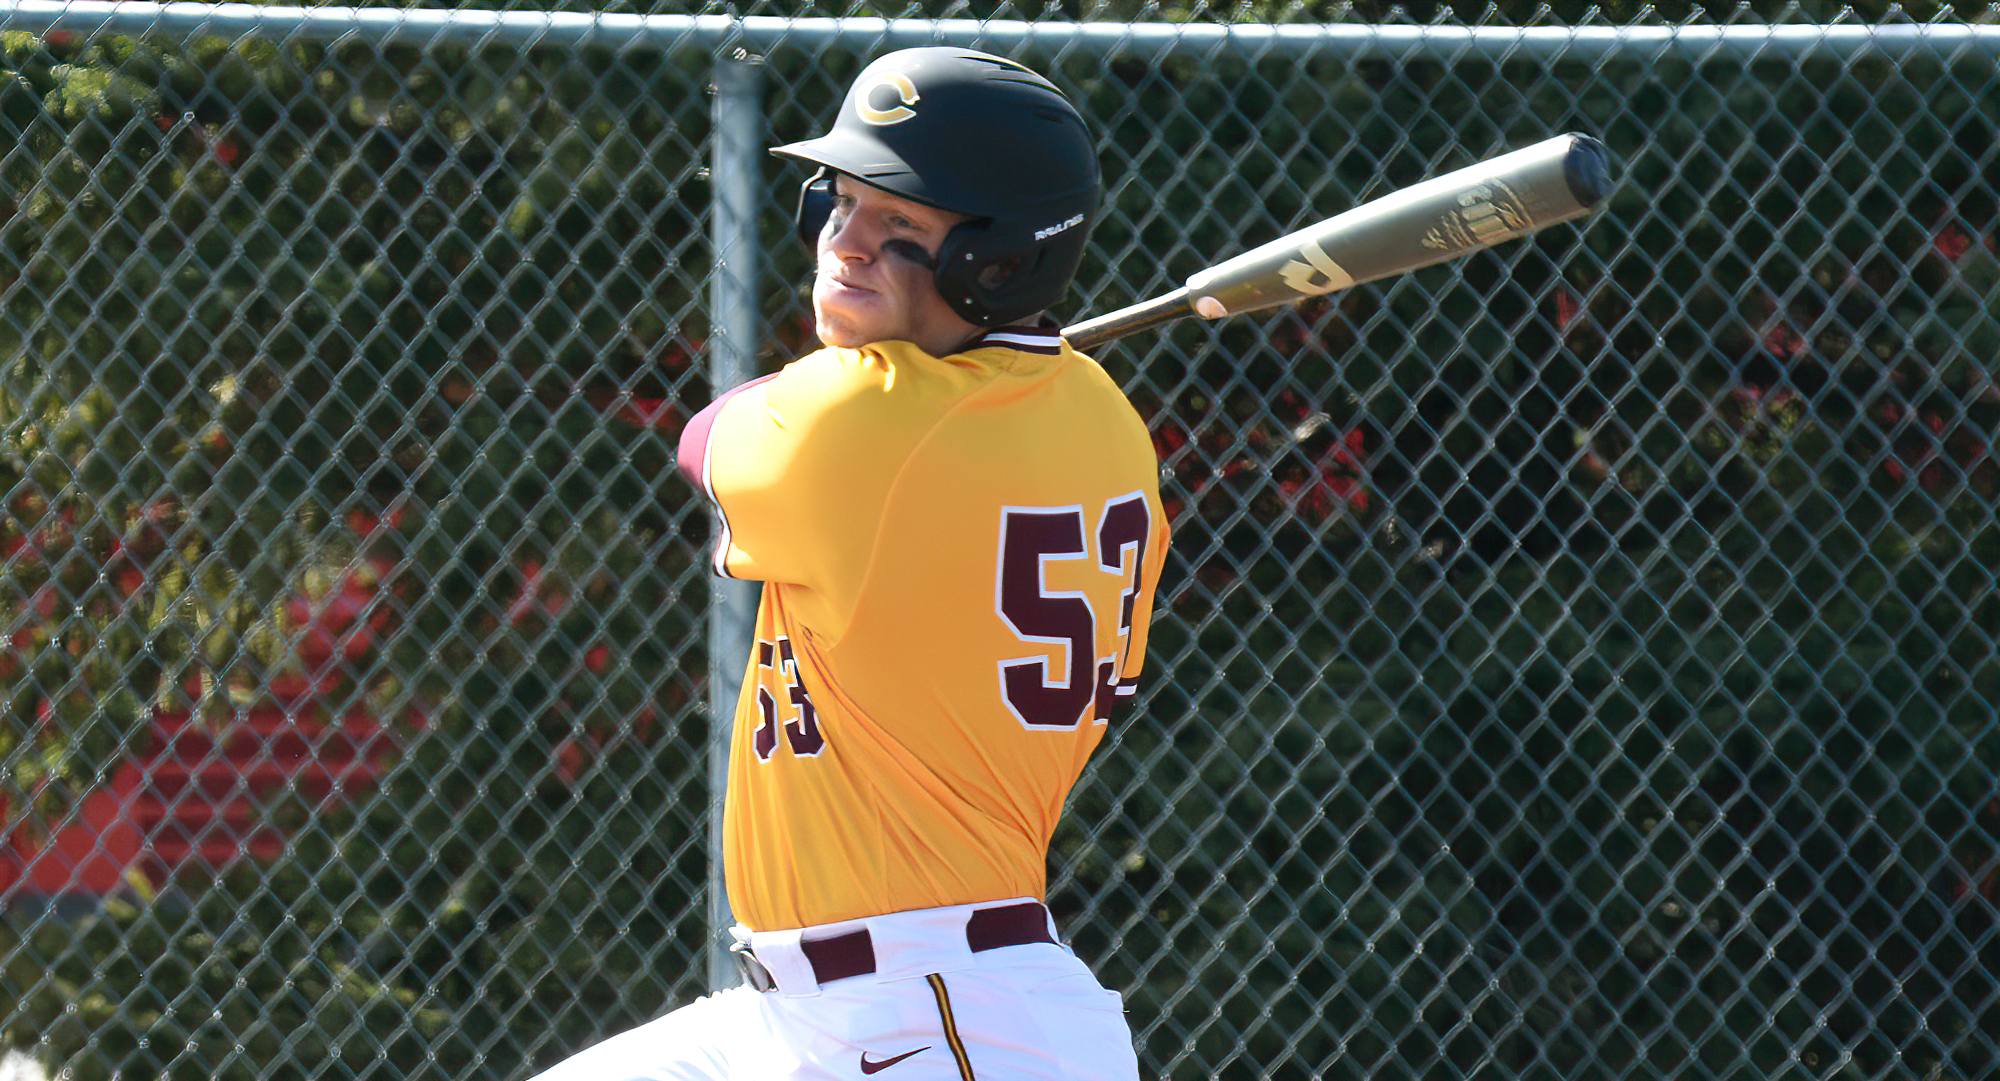 Isaac Henkemeyer-Howe was one of two Cobber players to have a hit in both games in the split with Loras. He also had an RBI in the Game 2 win.